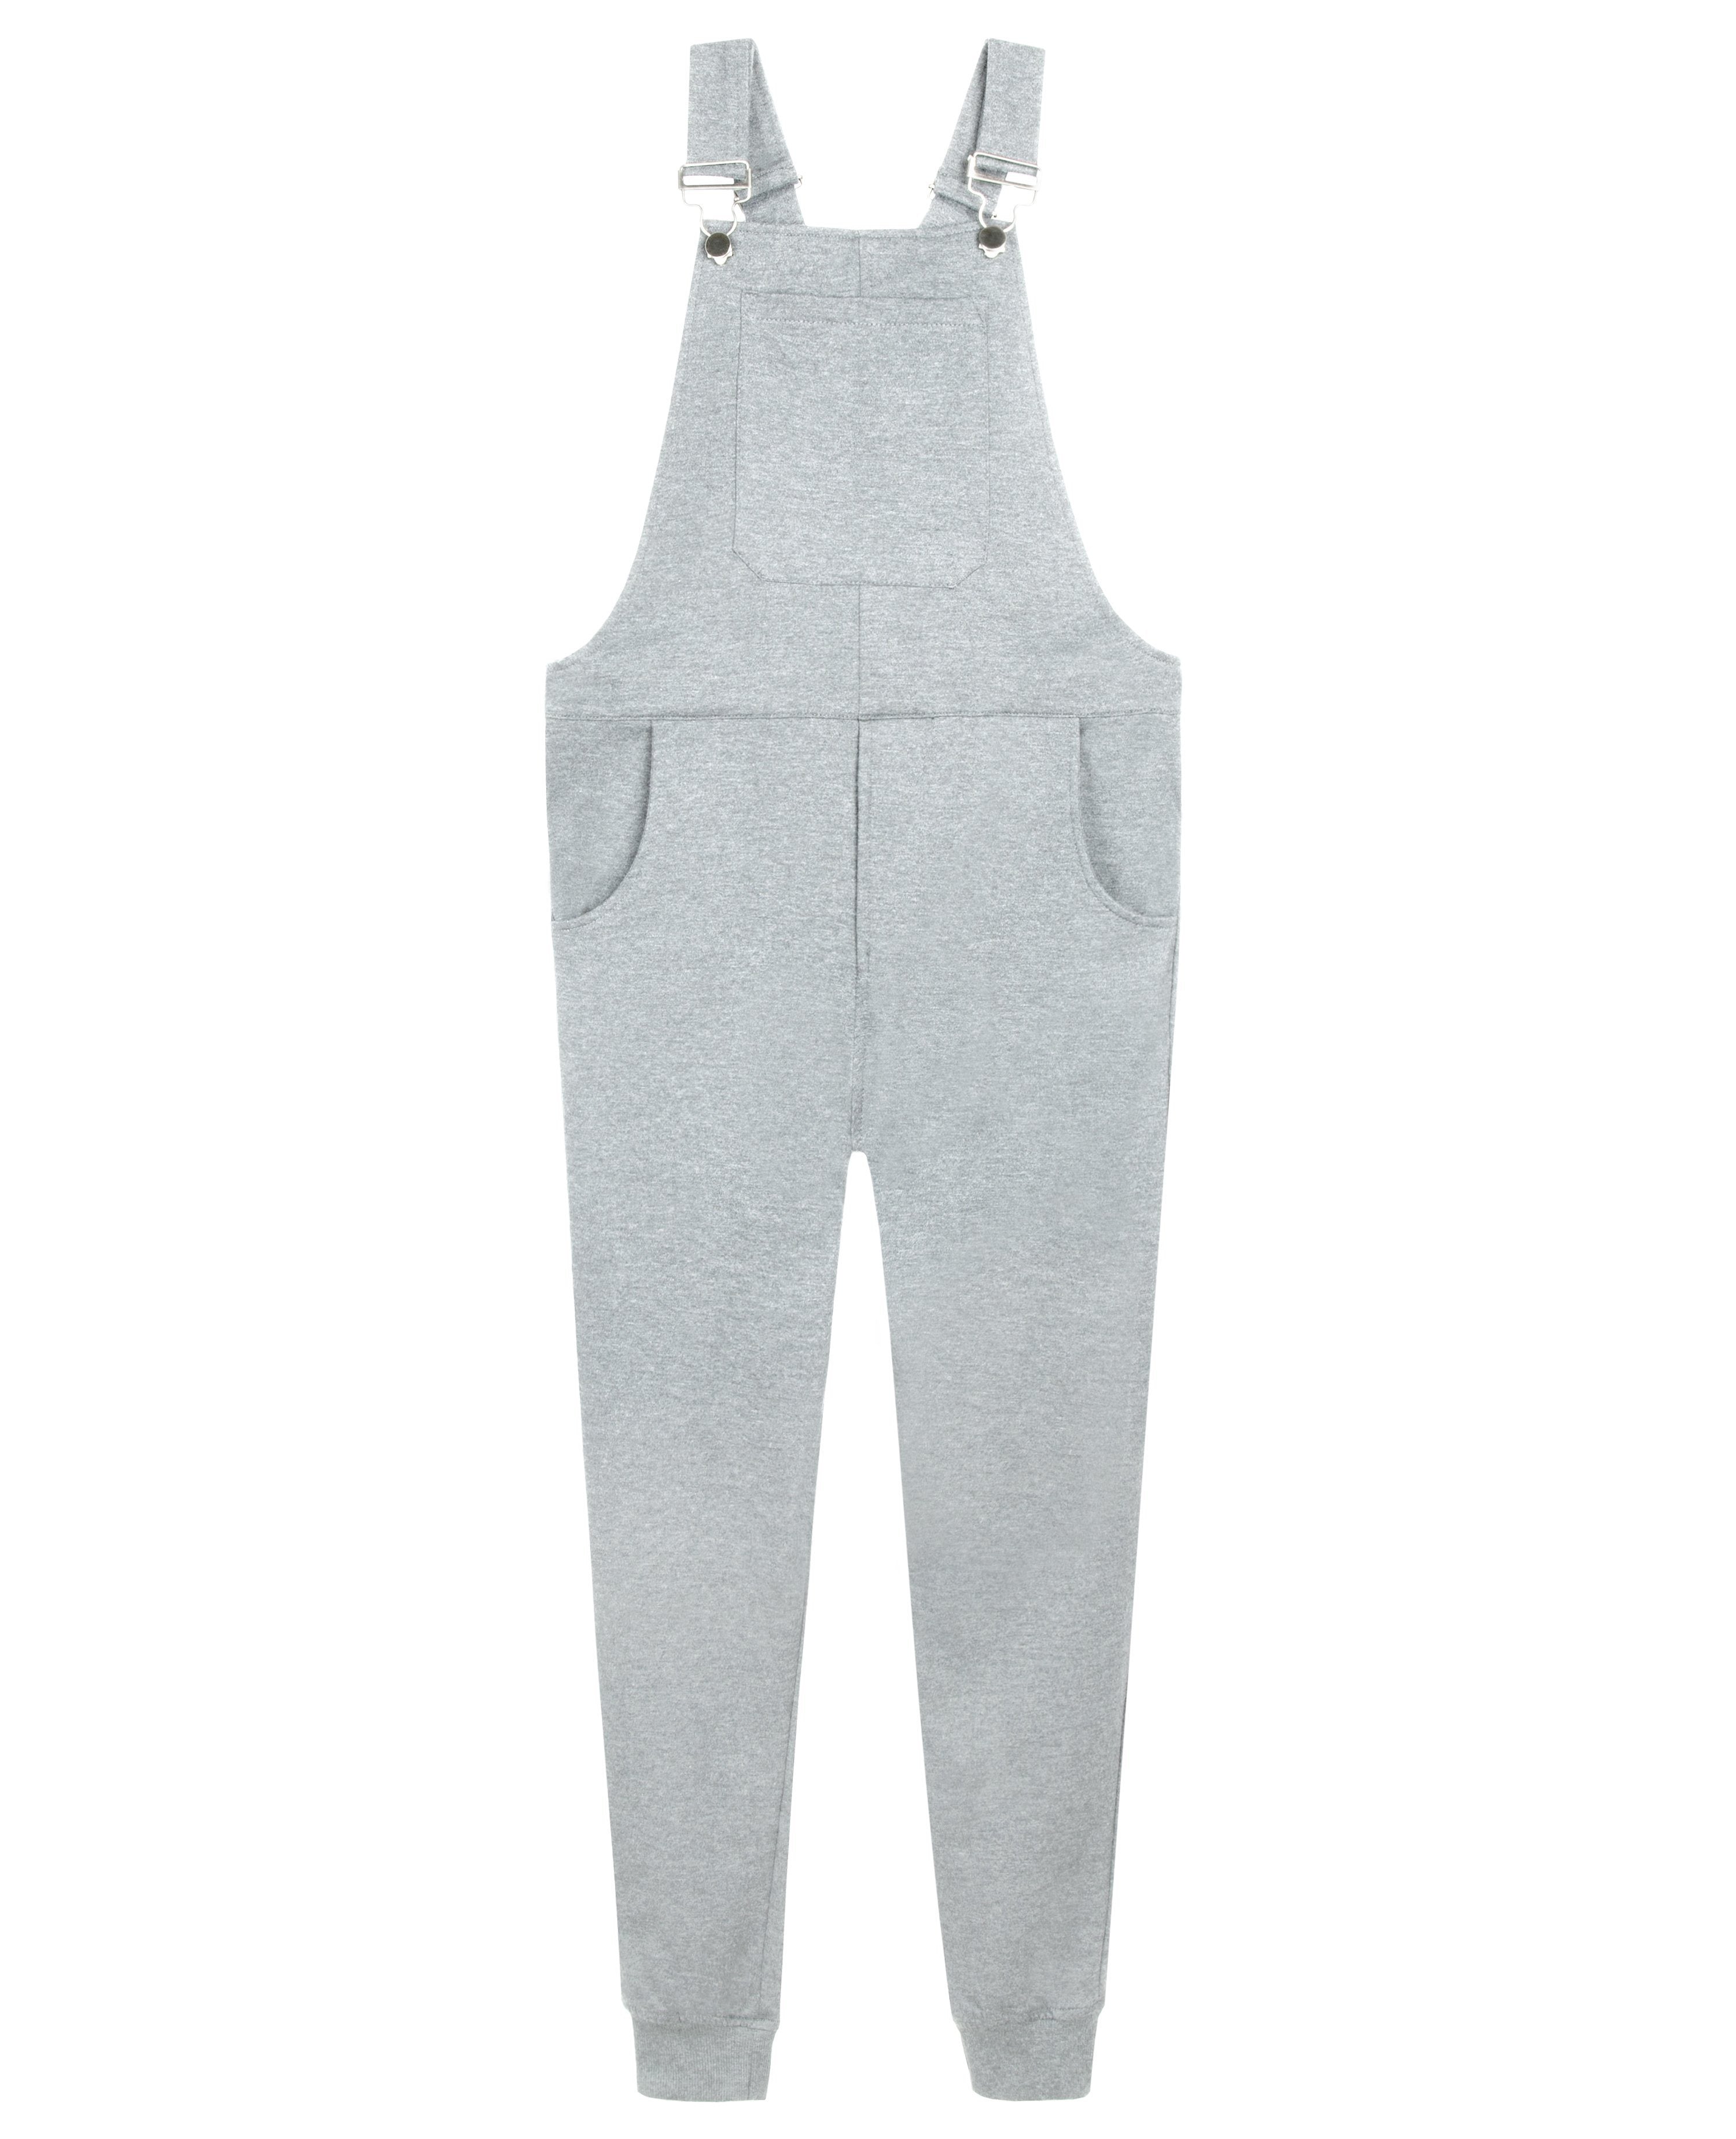 Swoveralls - Light Heather Grey [Limited Edition!] Sweatpant Overalls The Great Fantastic